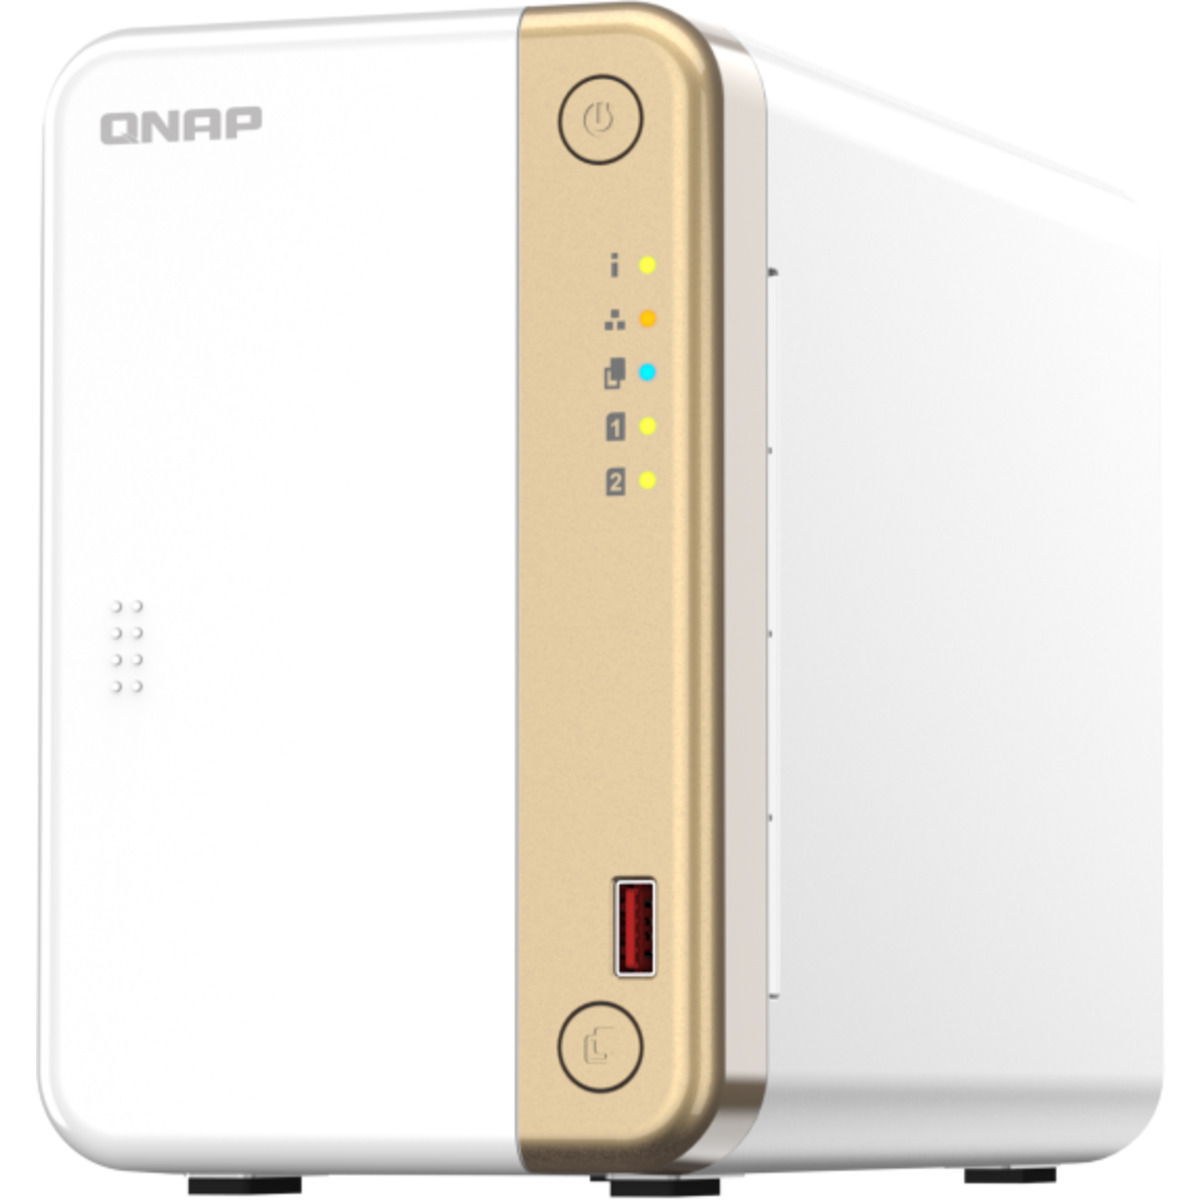 buy $966 QNAP TS-262 12tb Desktop NAS - Network Attached Storage Device 2x6000gb Seagate IronWolf Pro ST6000NT001 3.5 7200rpm SATA 6Gb/s HDD NAS Class Drives Installed - Burn-In Tested - nas headquarters buy network attached storage server device das new raid-5 free shipping simply usa TS-262